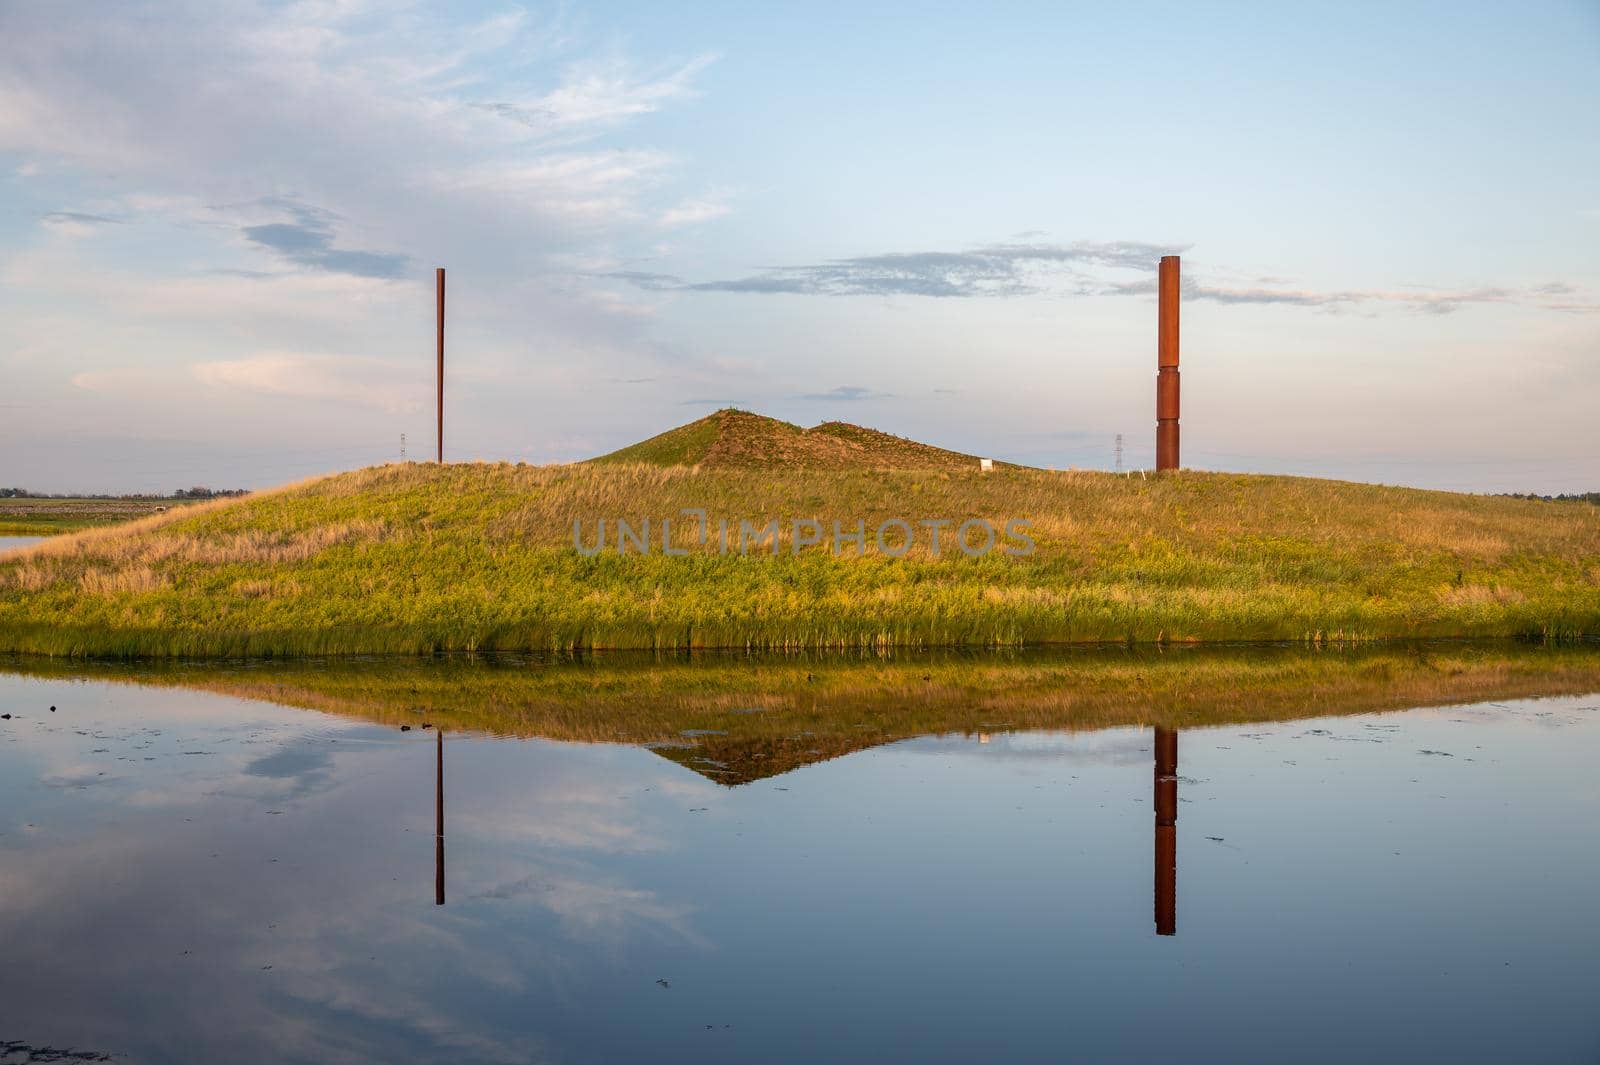 Calgary, Alberta - July 8, 2021: Features and grounds  at the Ralph Klein Park, Calgary, Alberta.